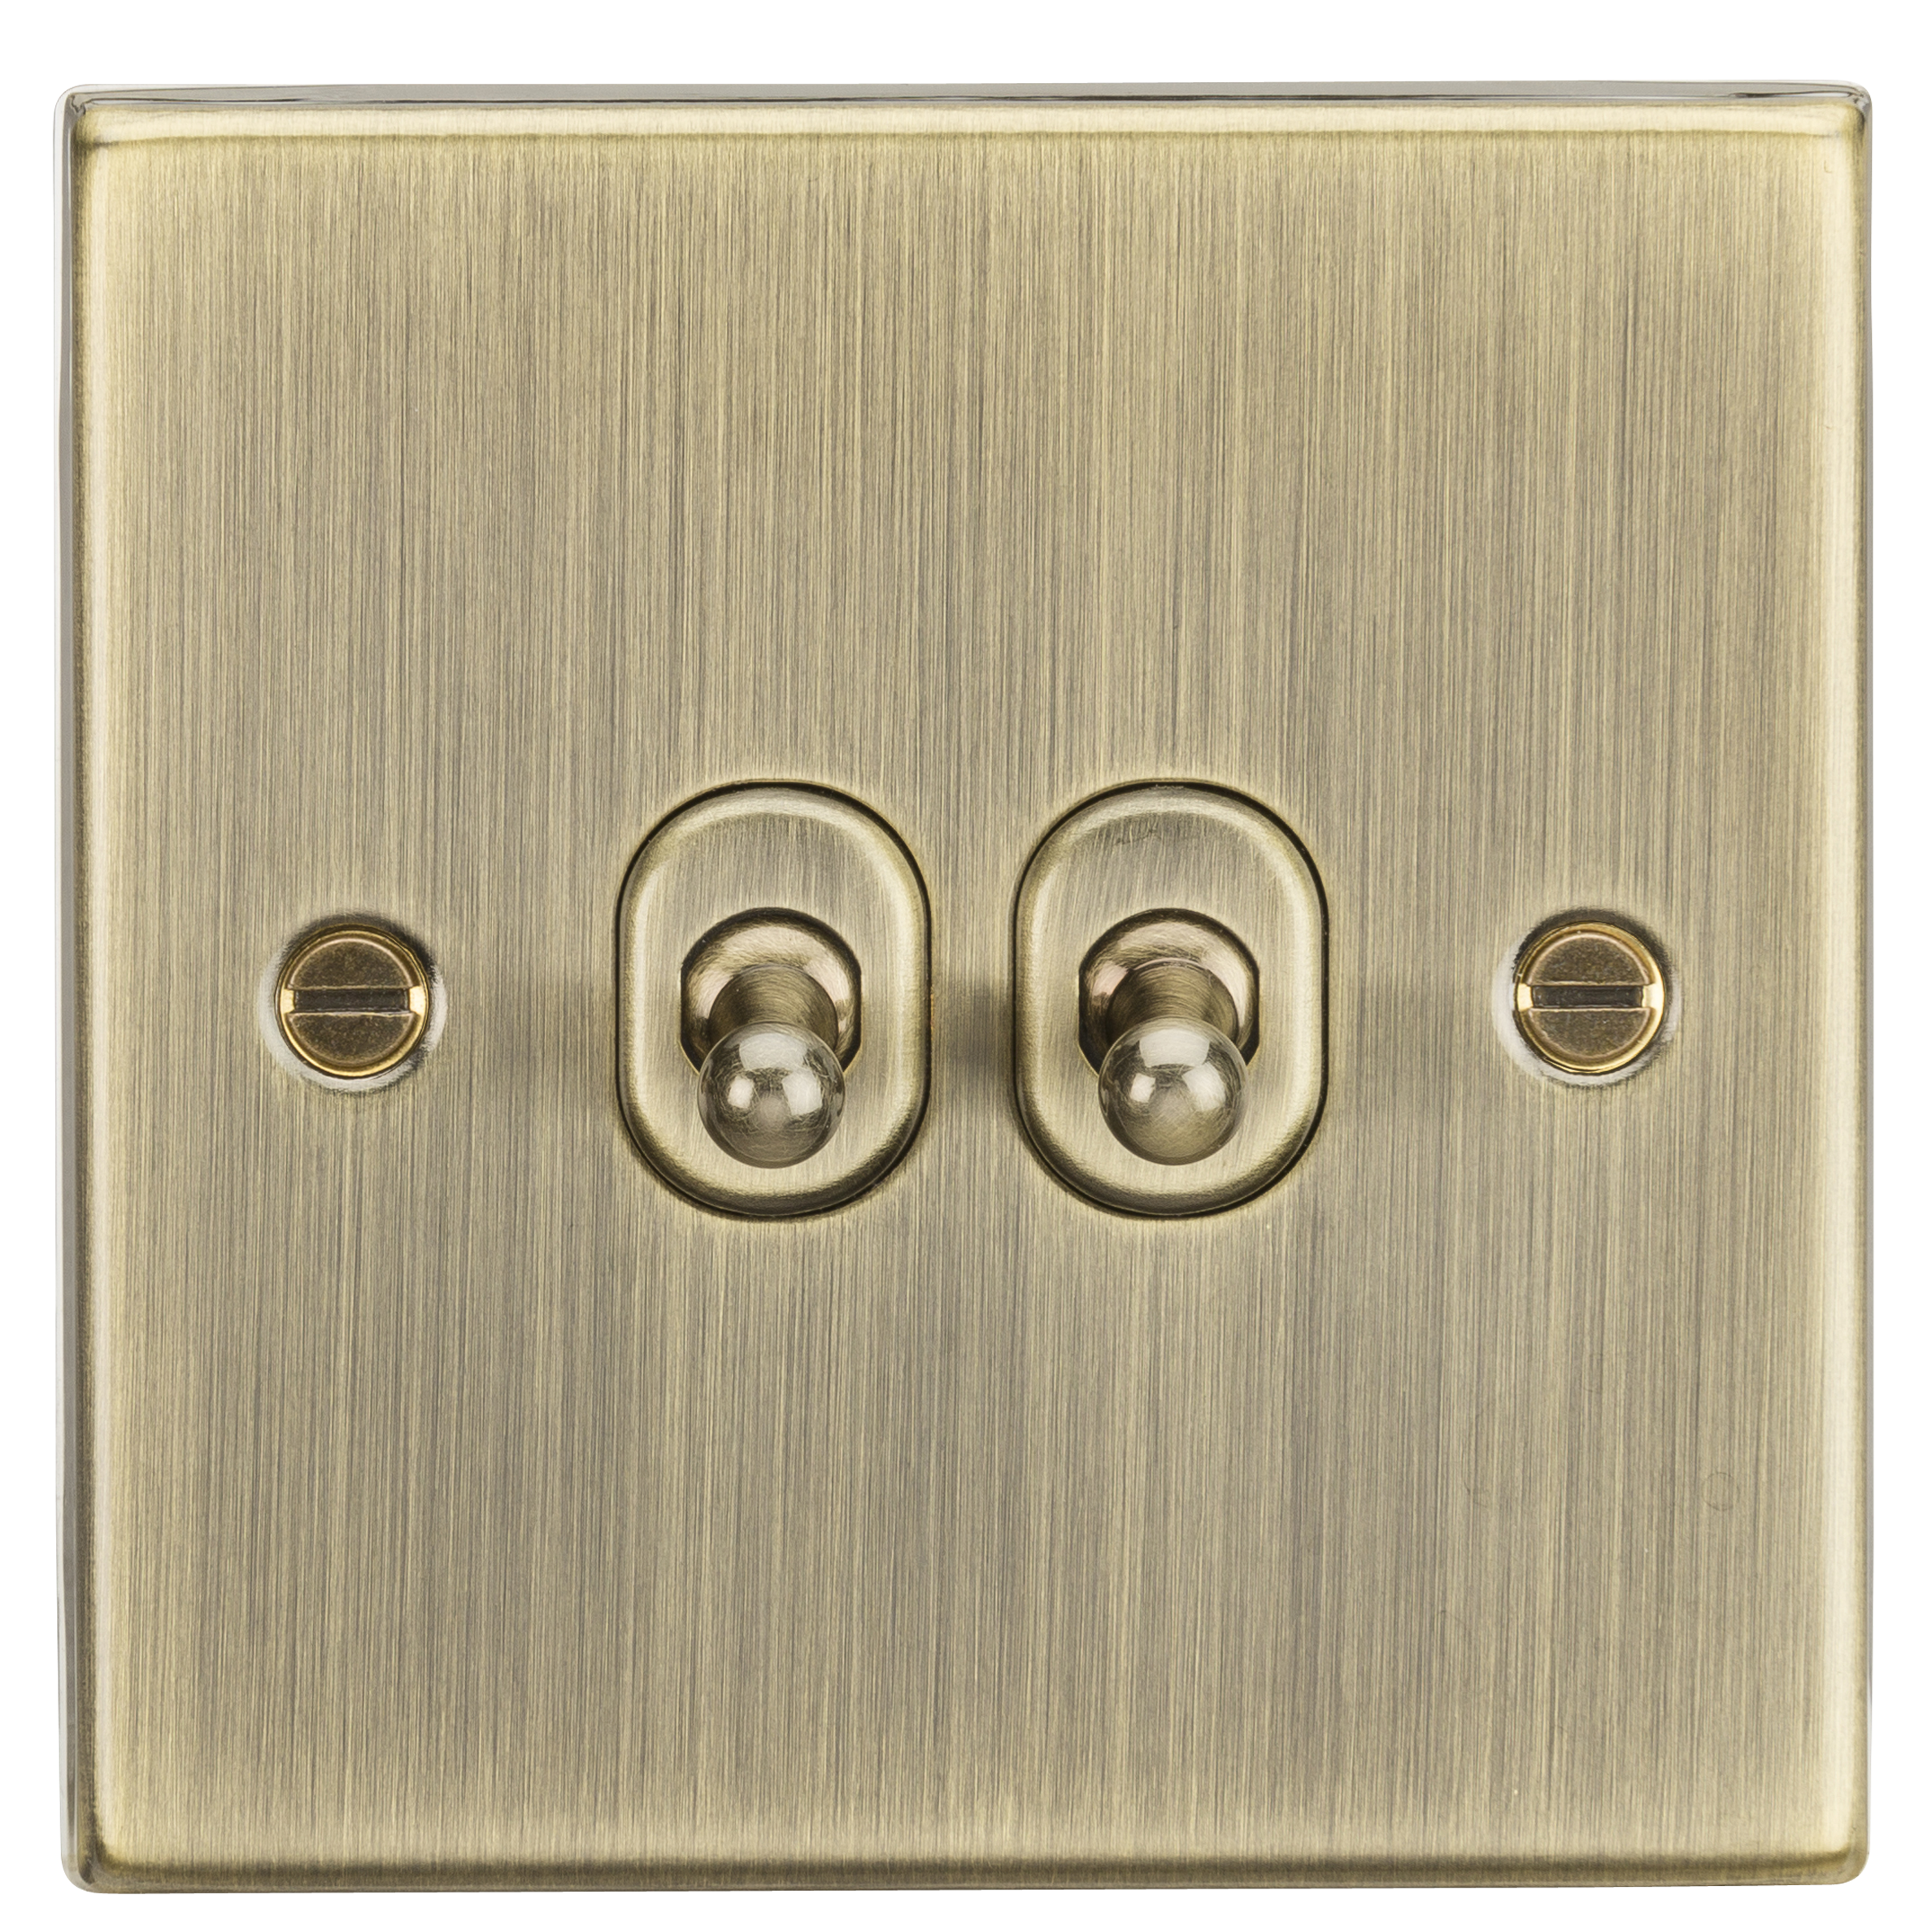 10A 2G 2 Way Toggle Switch - Square Edge Antique Brass - CSTOG2AB 